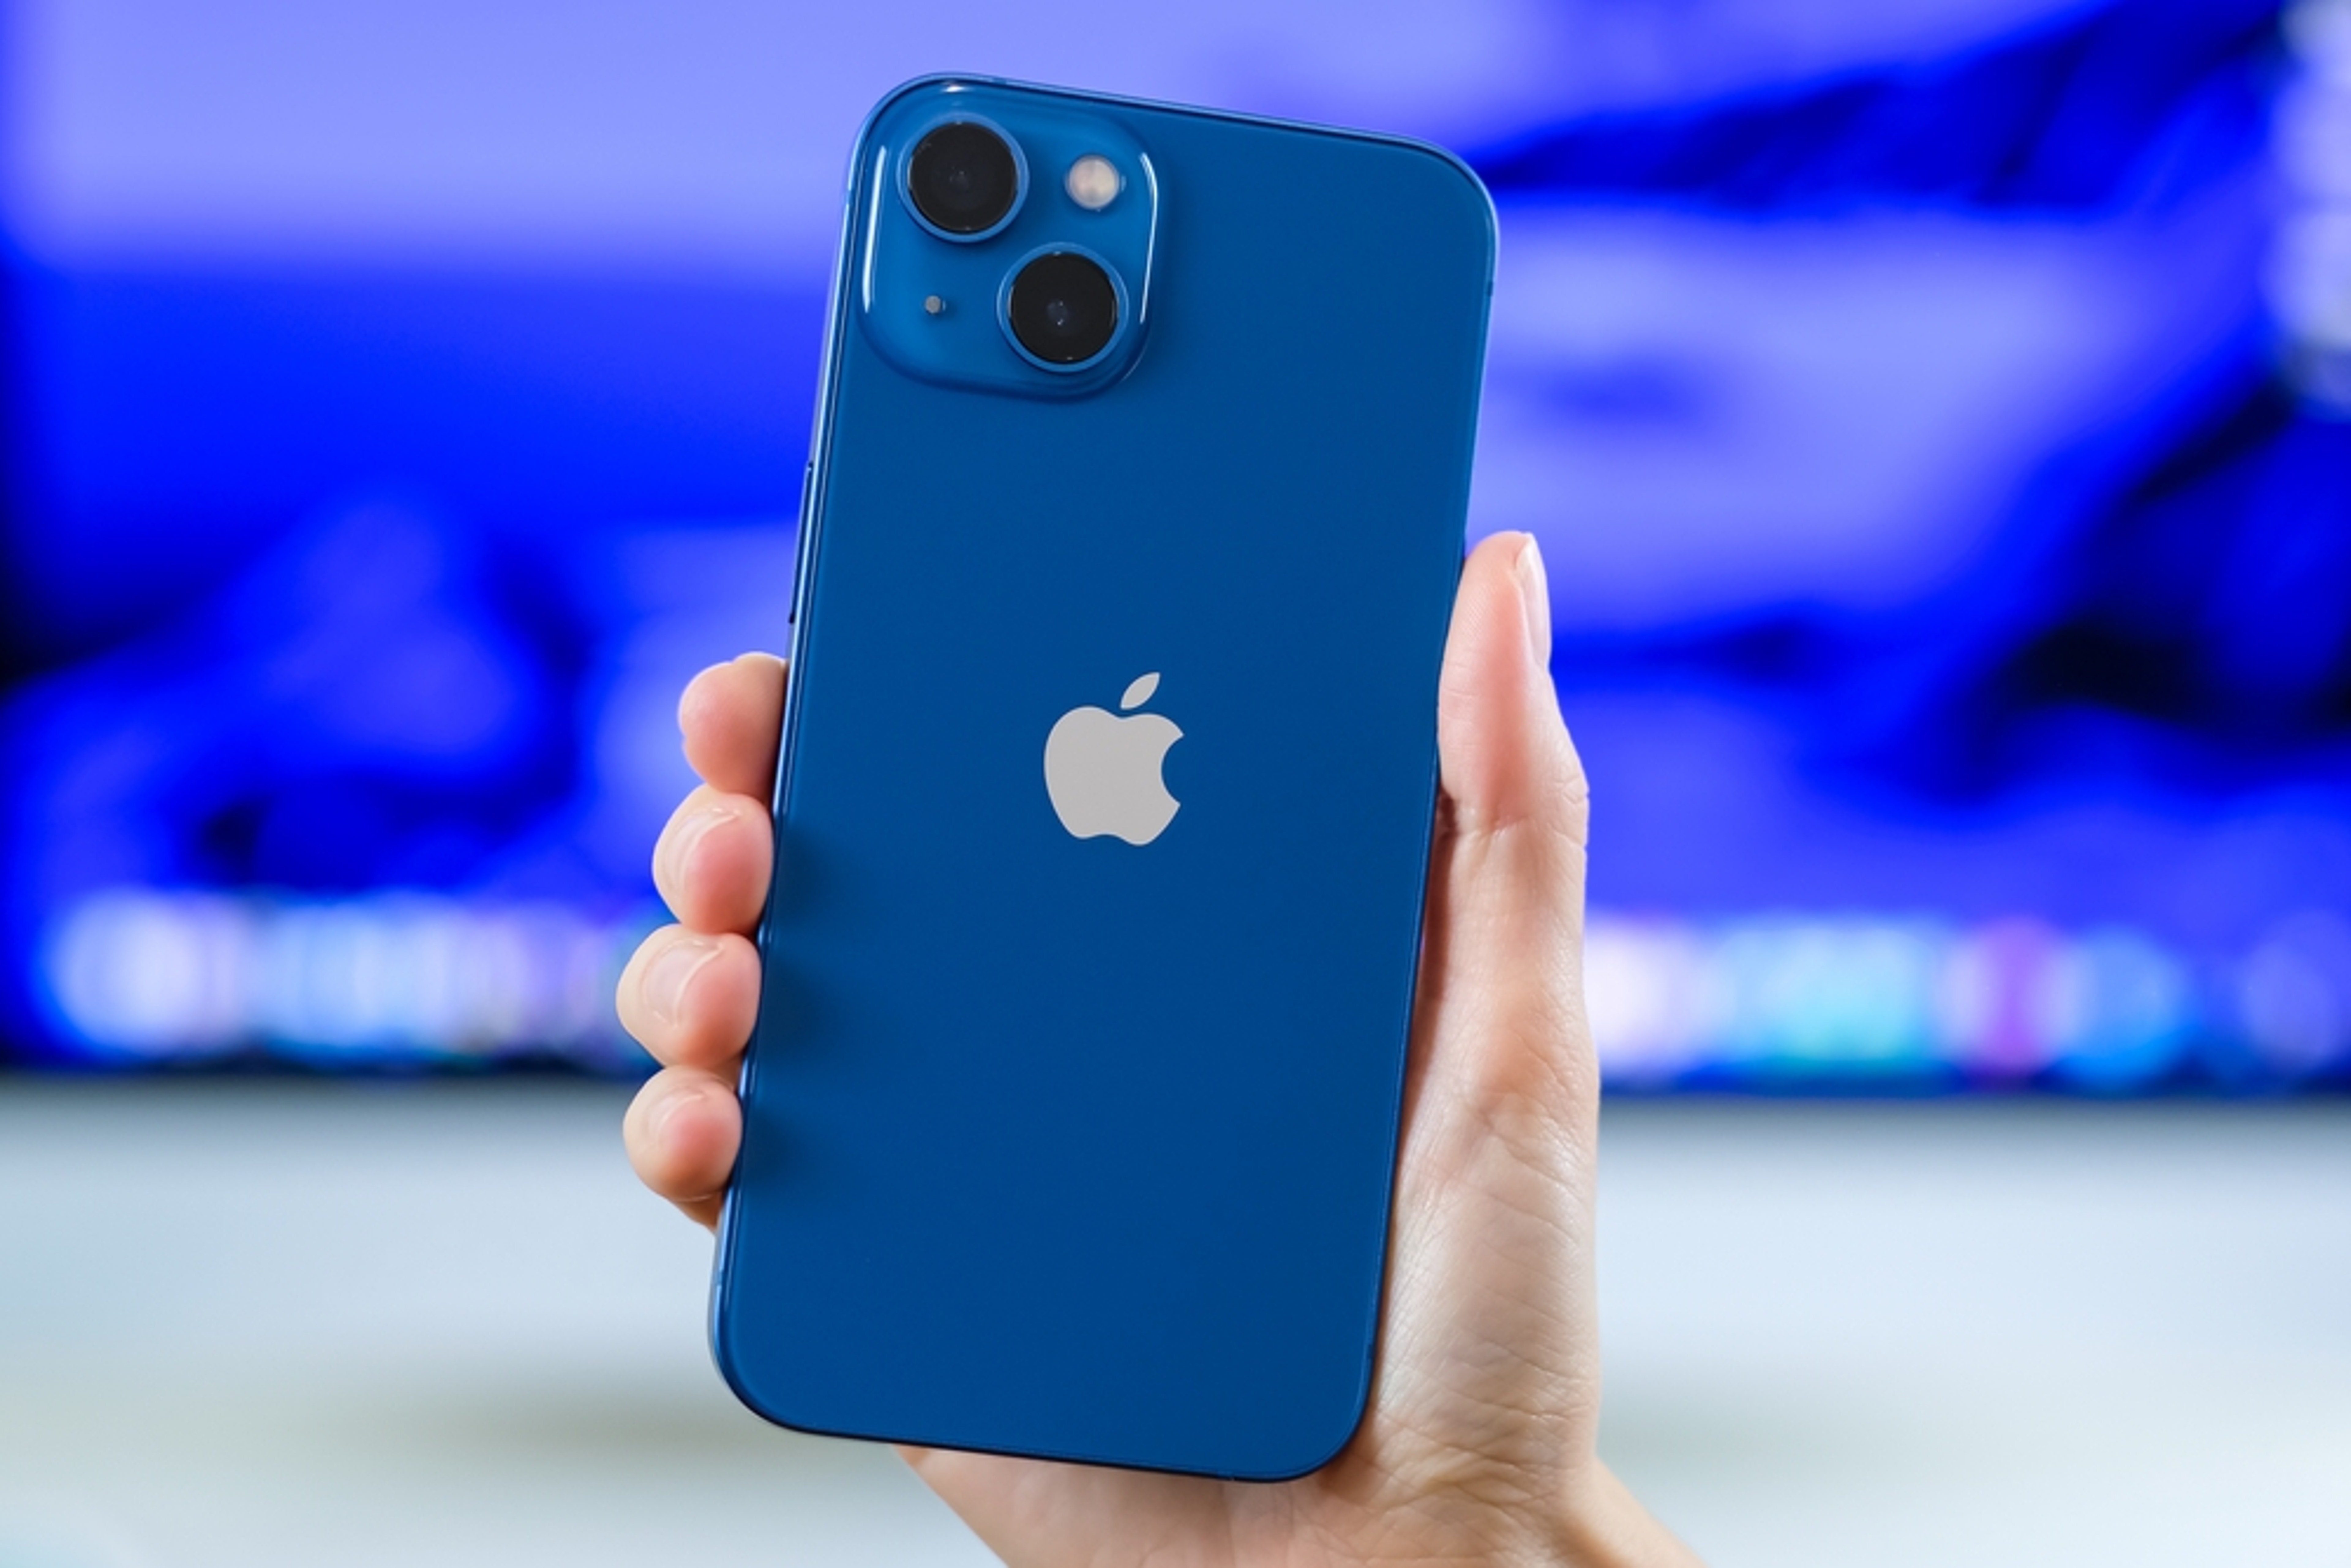 iPhone Production In India Surges A Whopping 162% As Apple Braces For China Scares